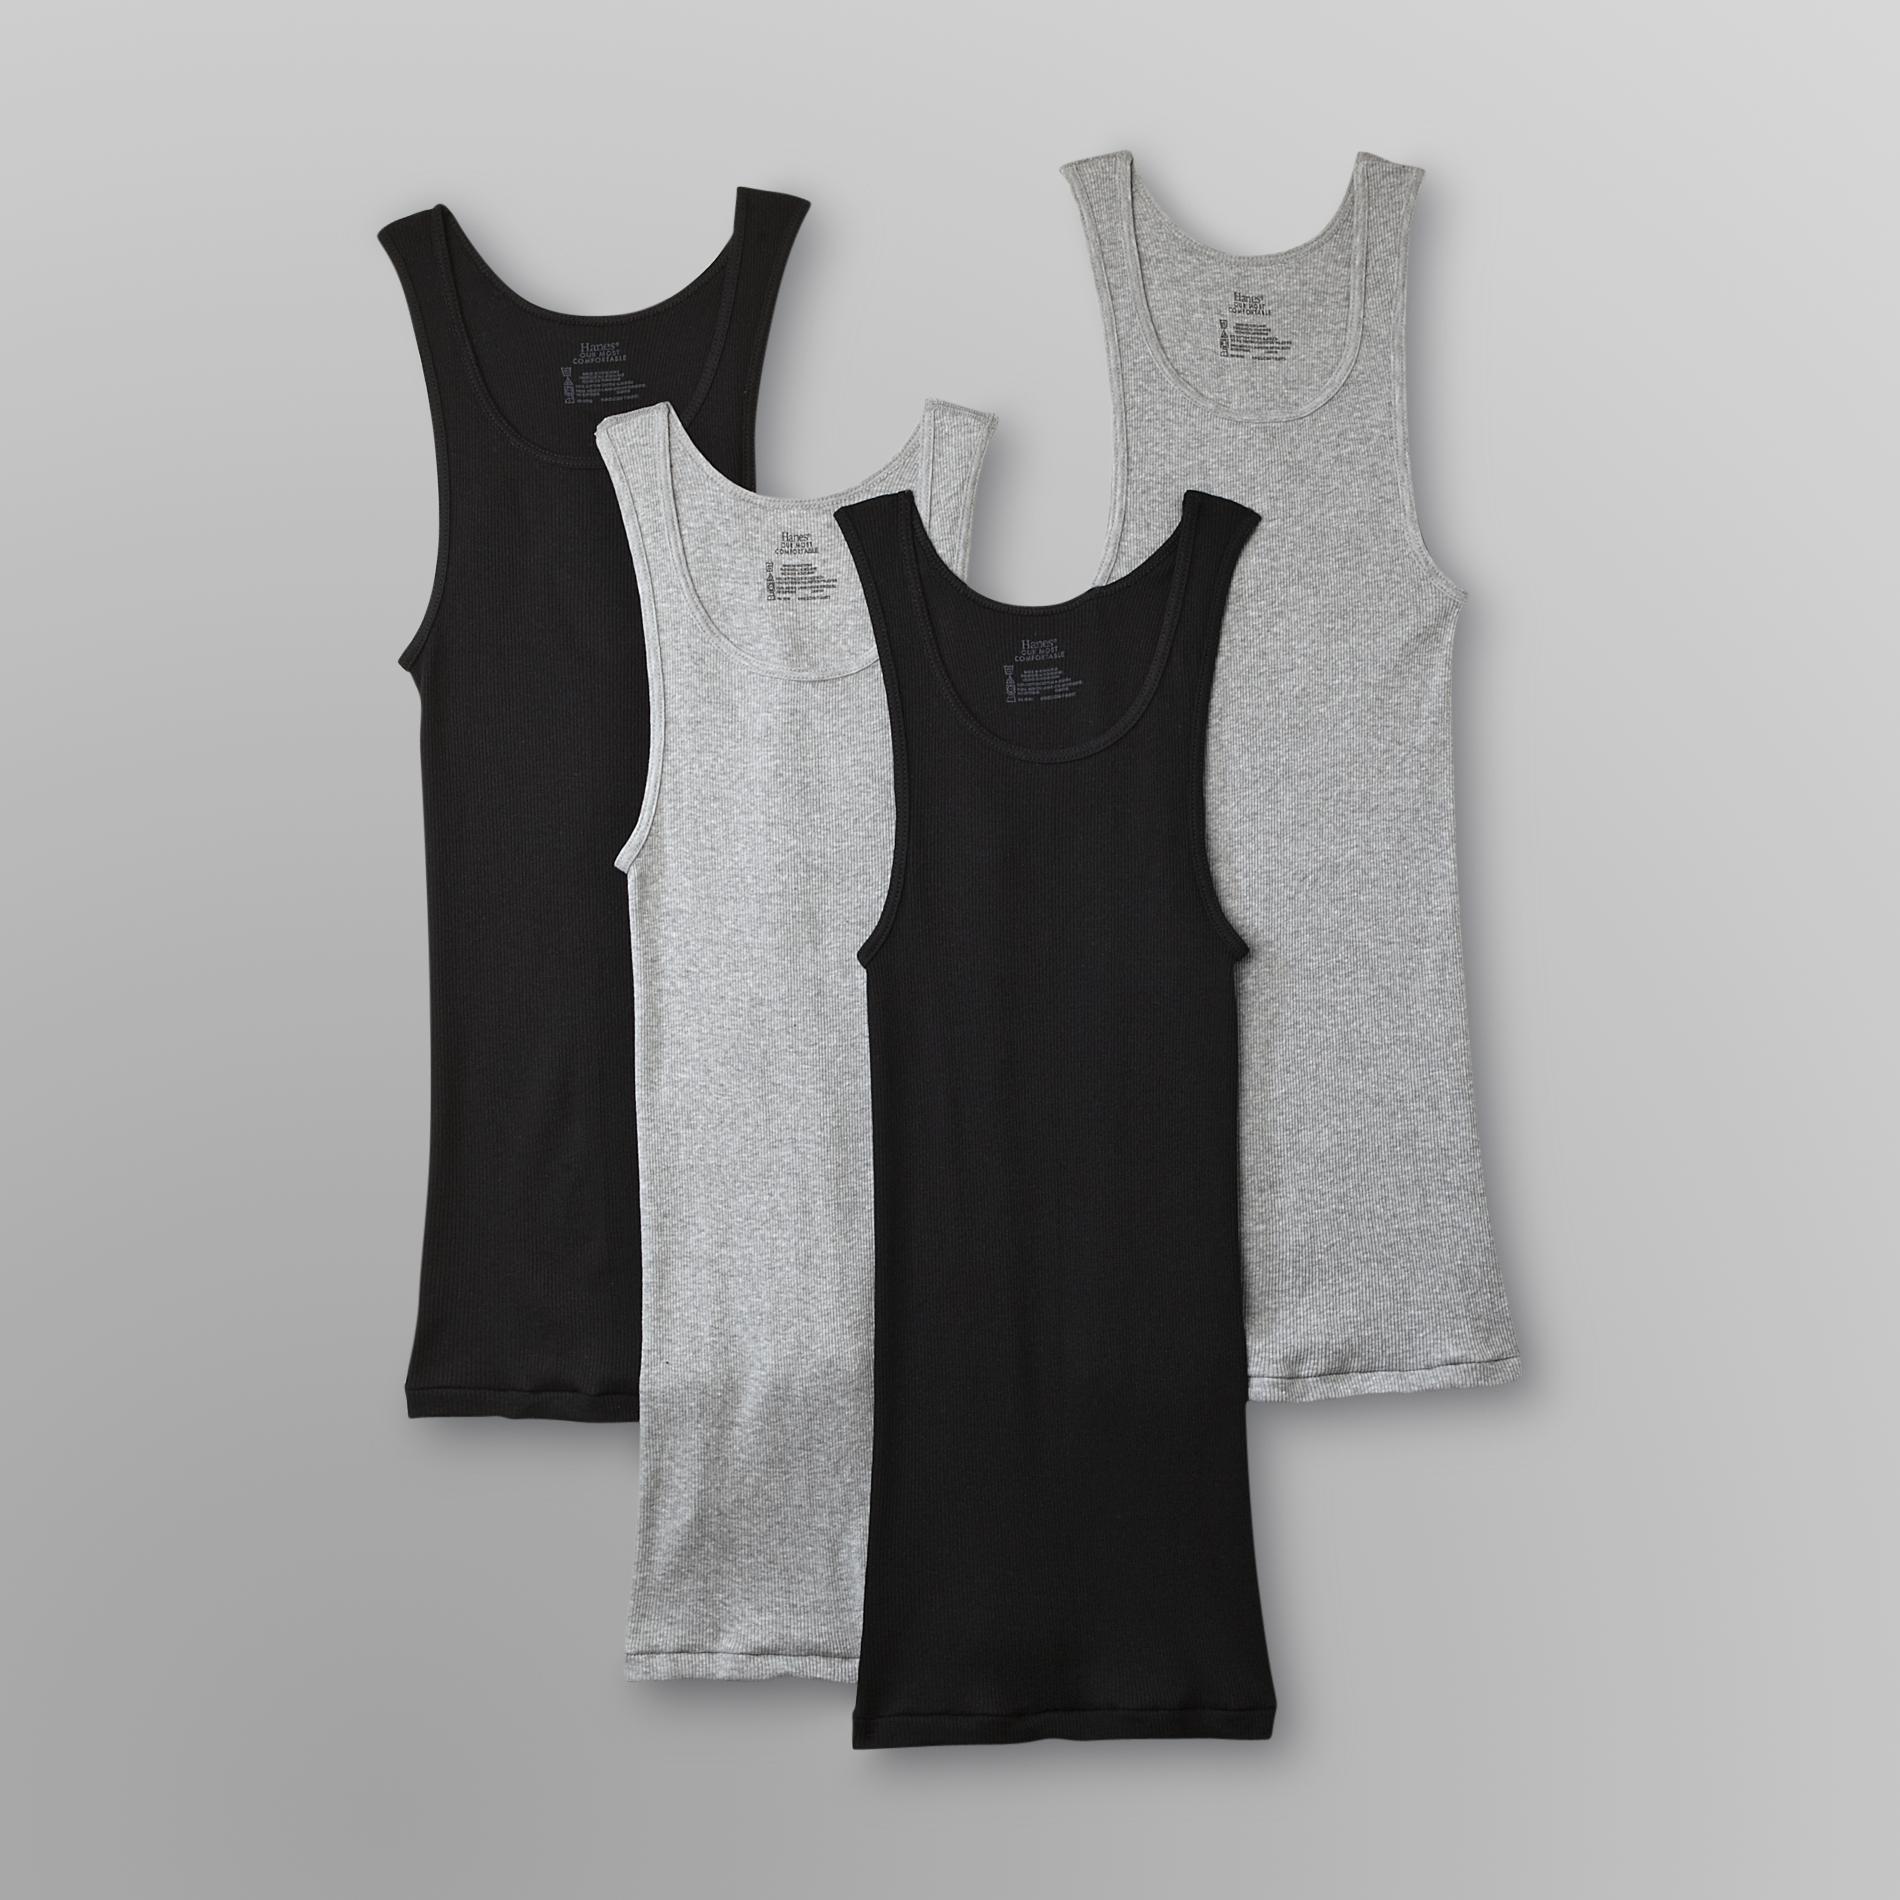 Hanes 4-Pack Men's Ultimate ComfortSoft Tank Top T-Shirts